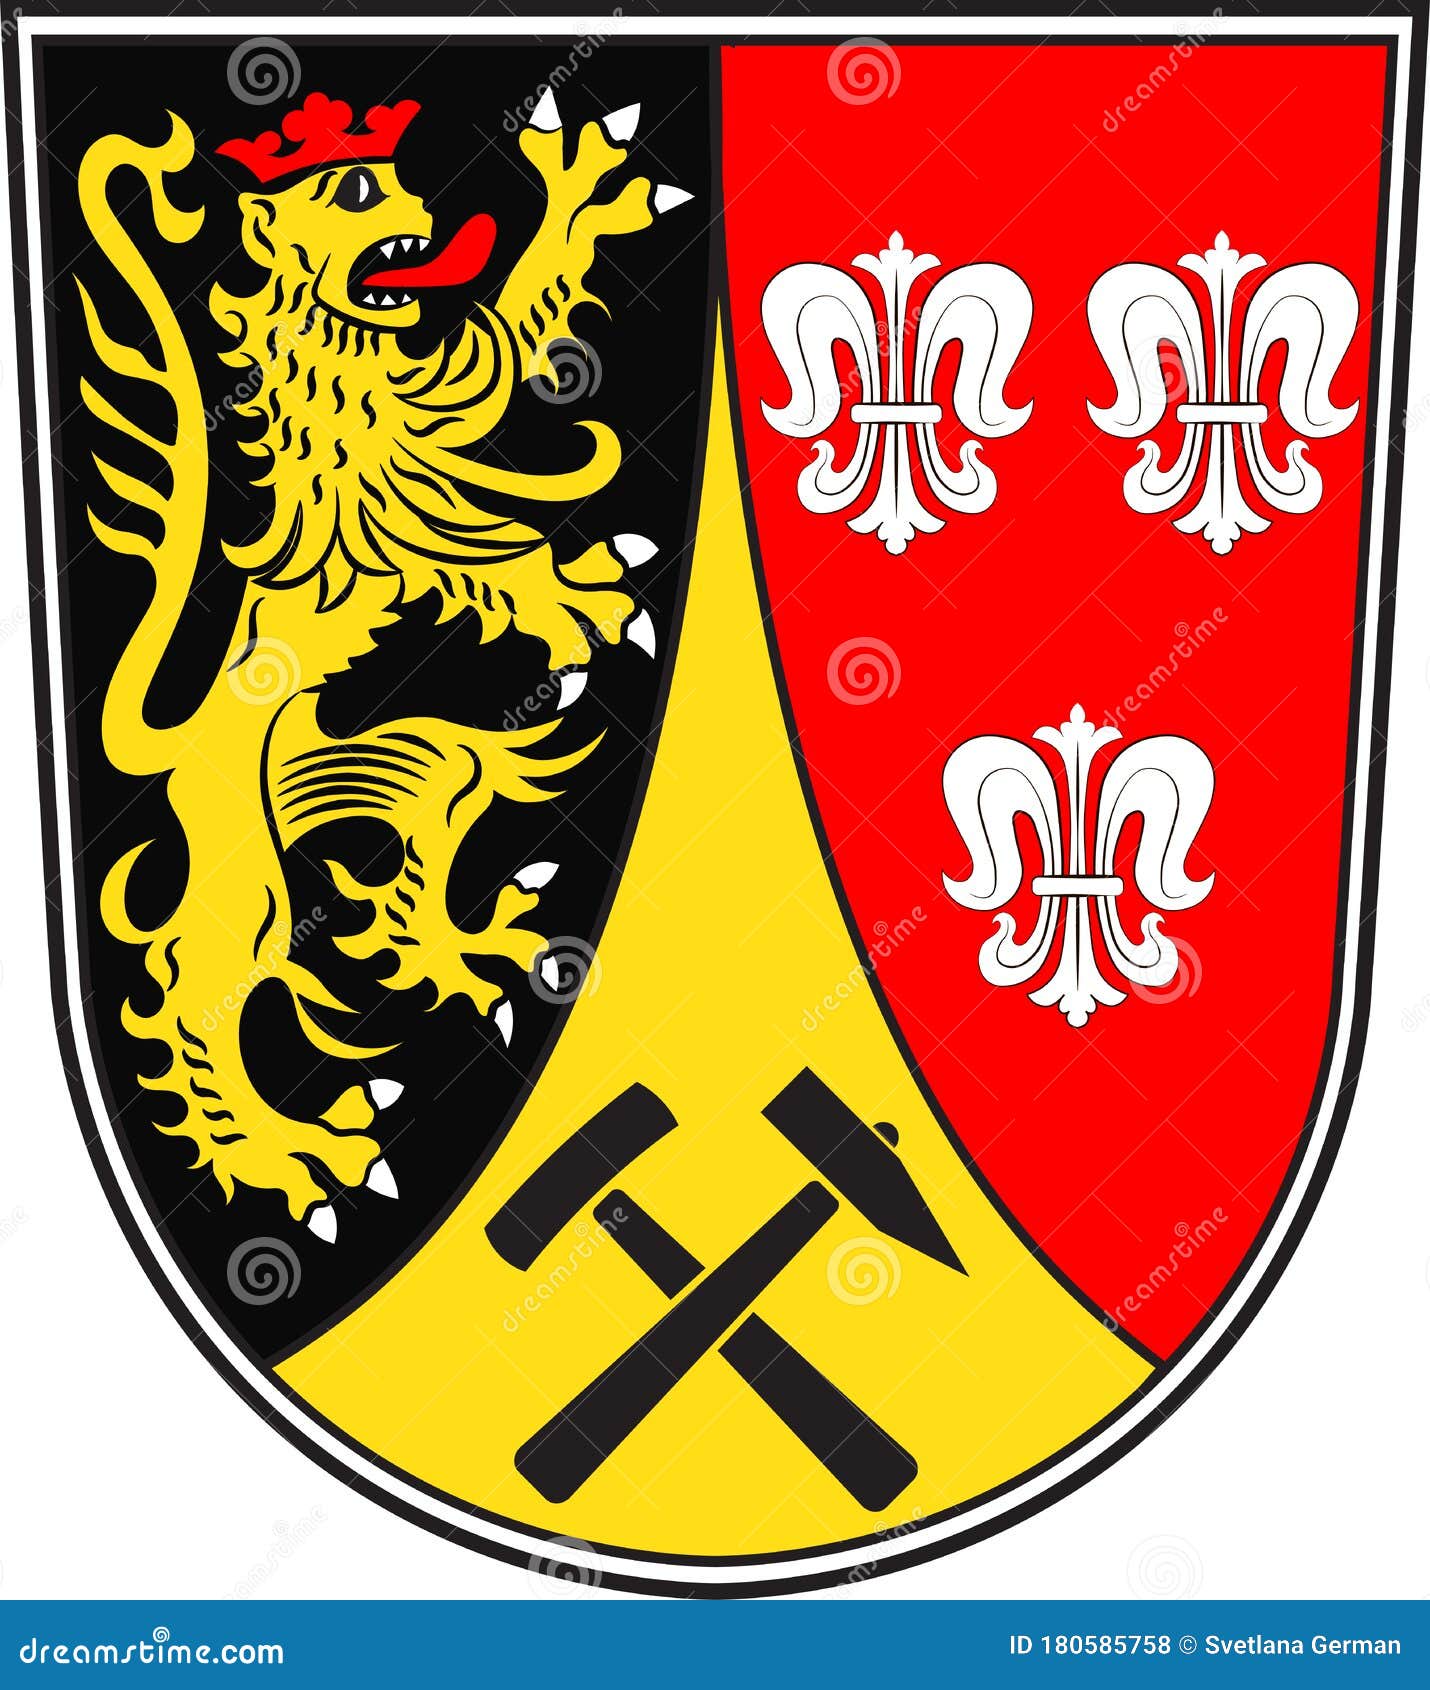 coat of arms of amberg-sulzbach in bavaria, germany